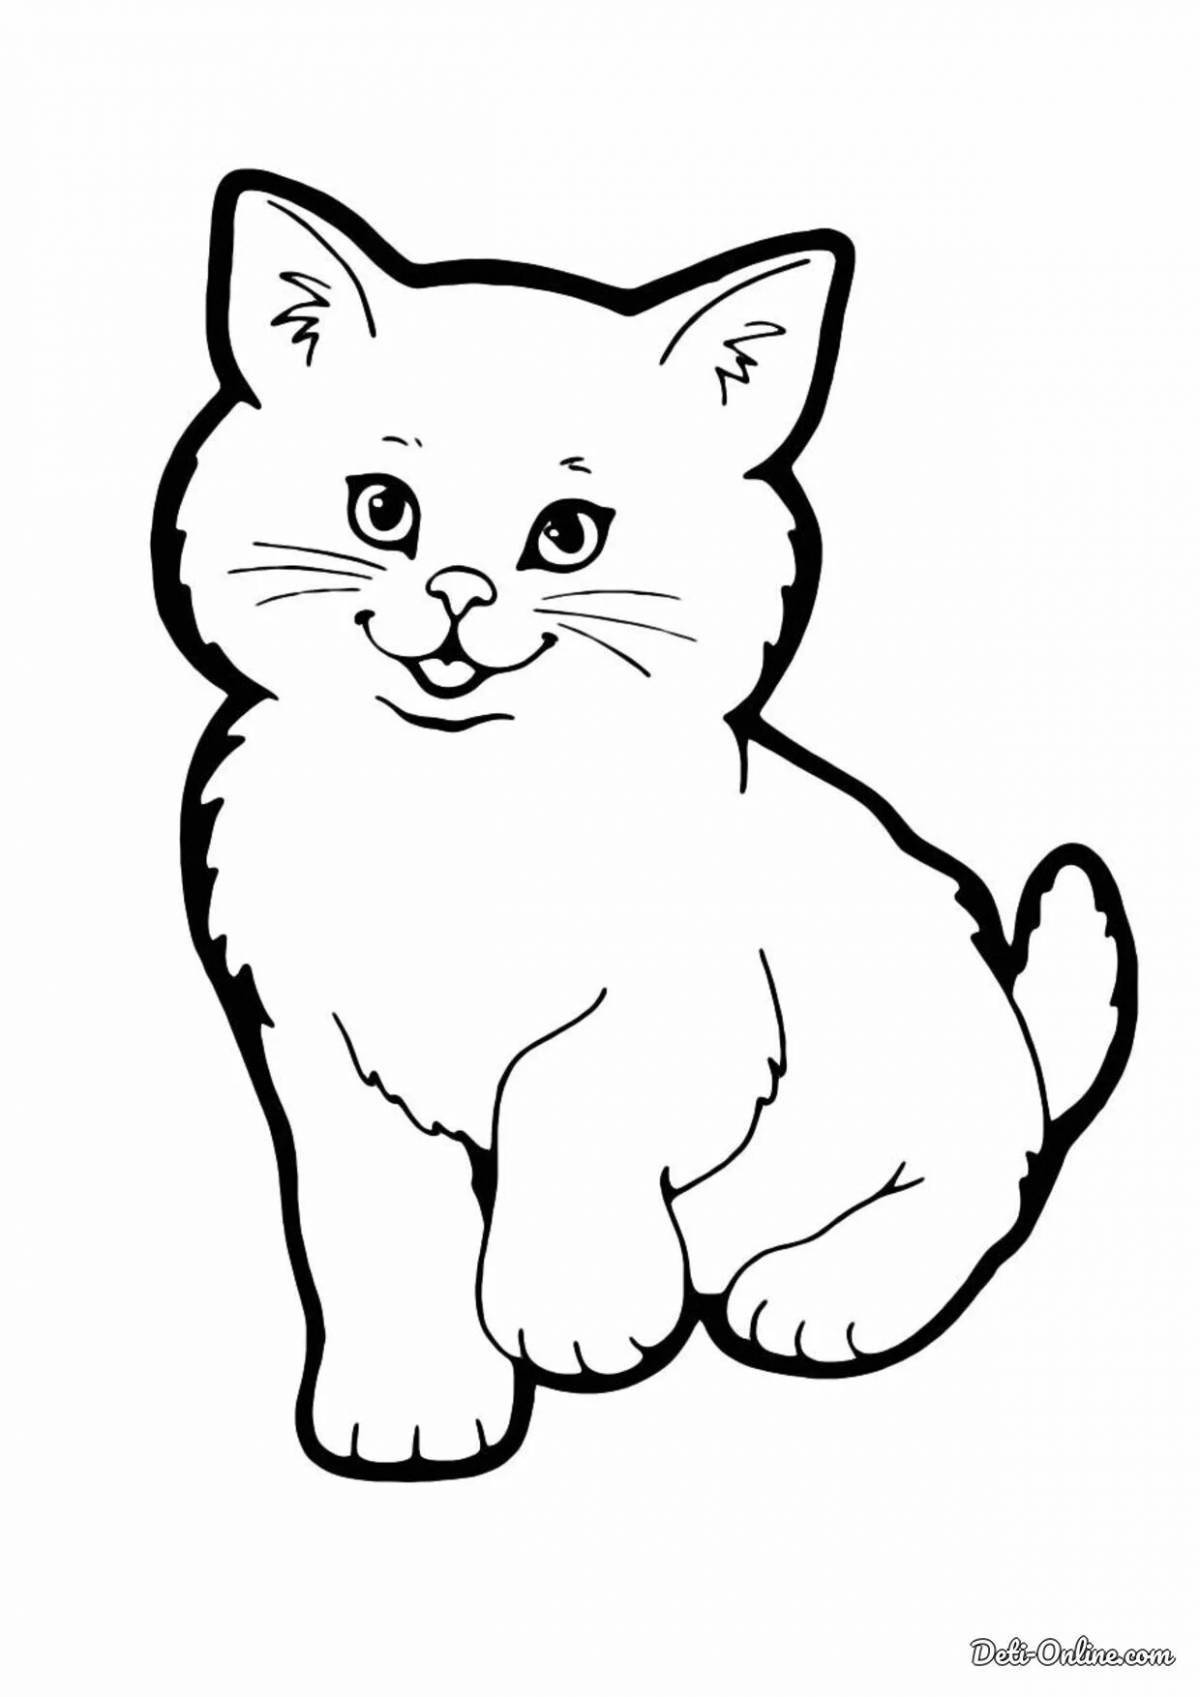 Coloring page cheerful little kitty